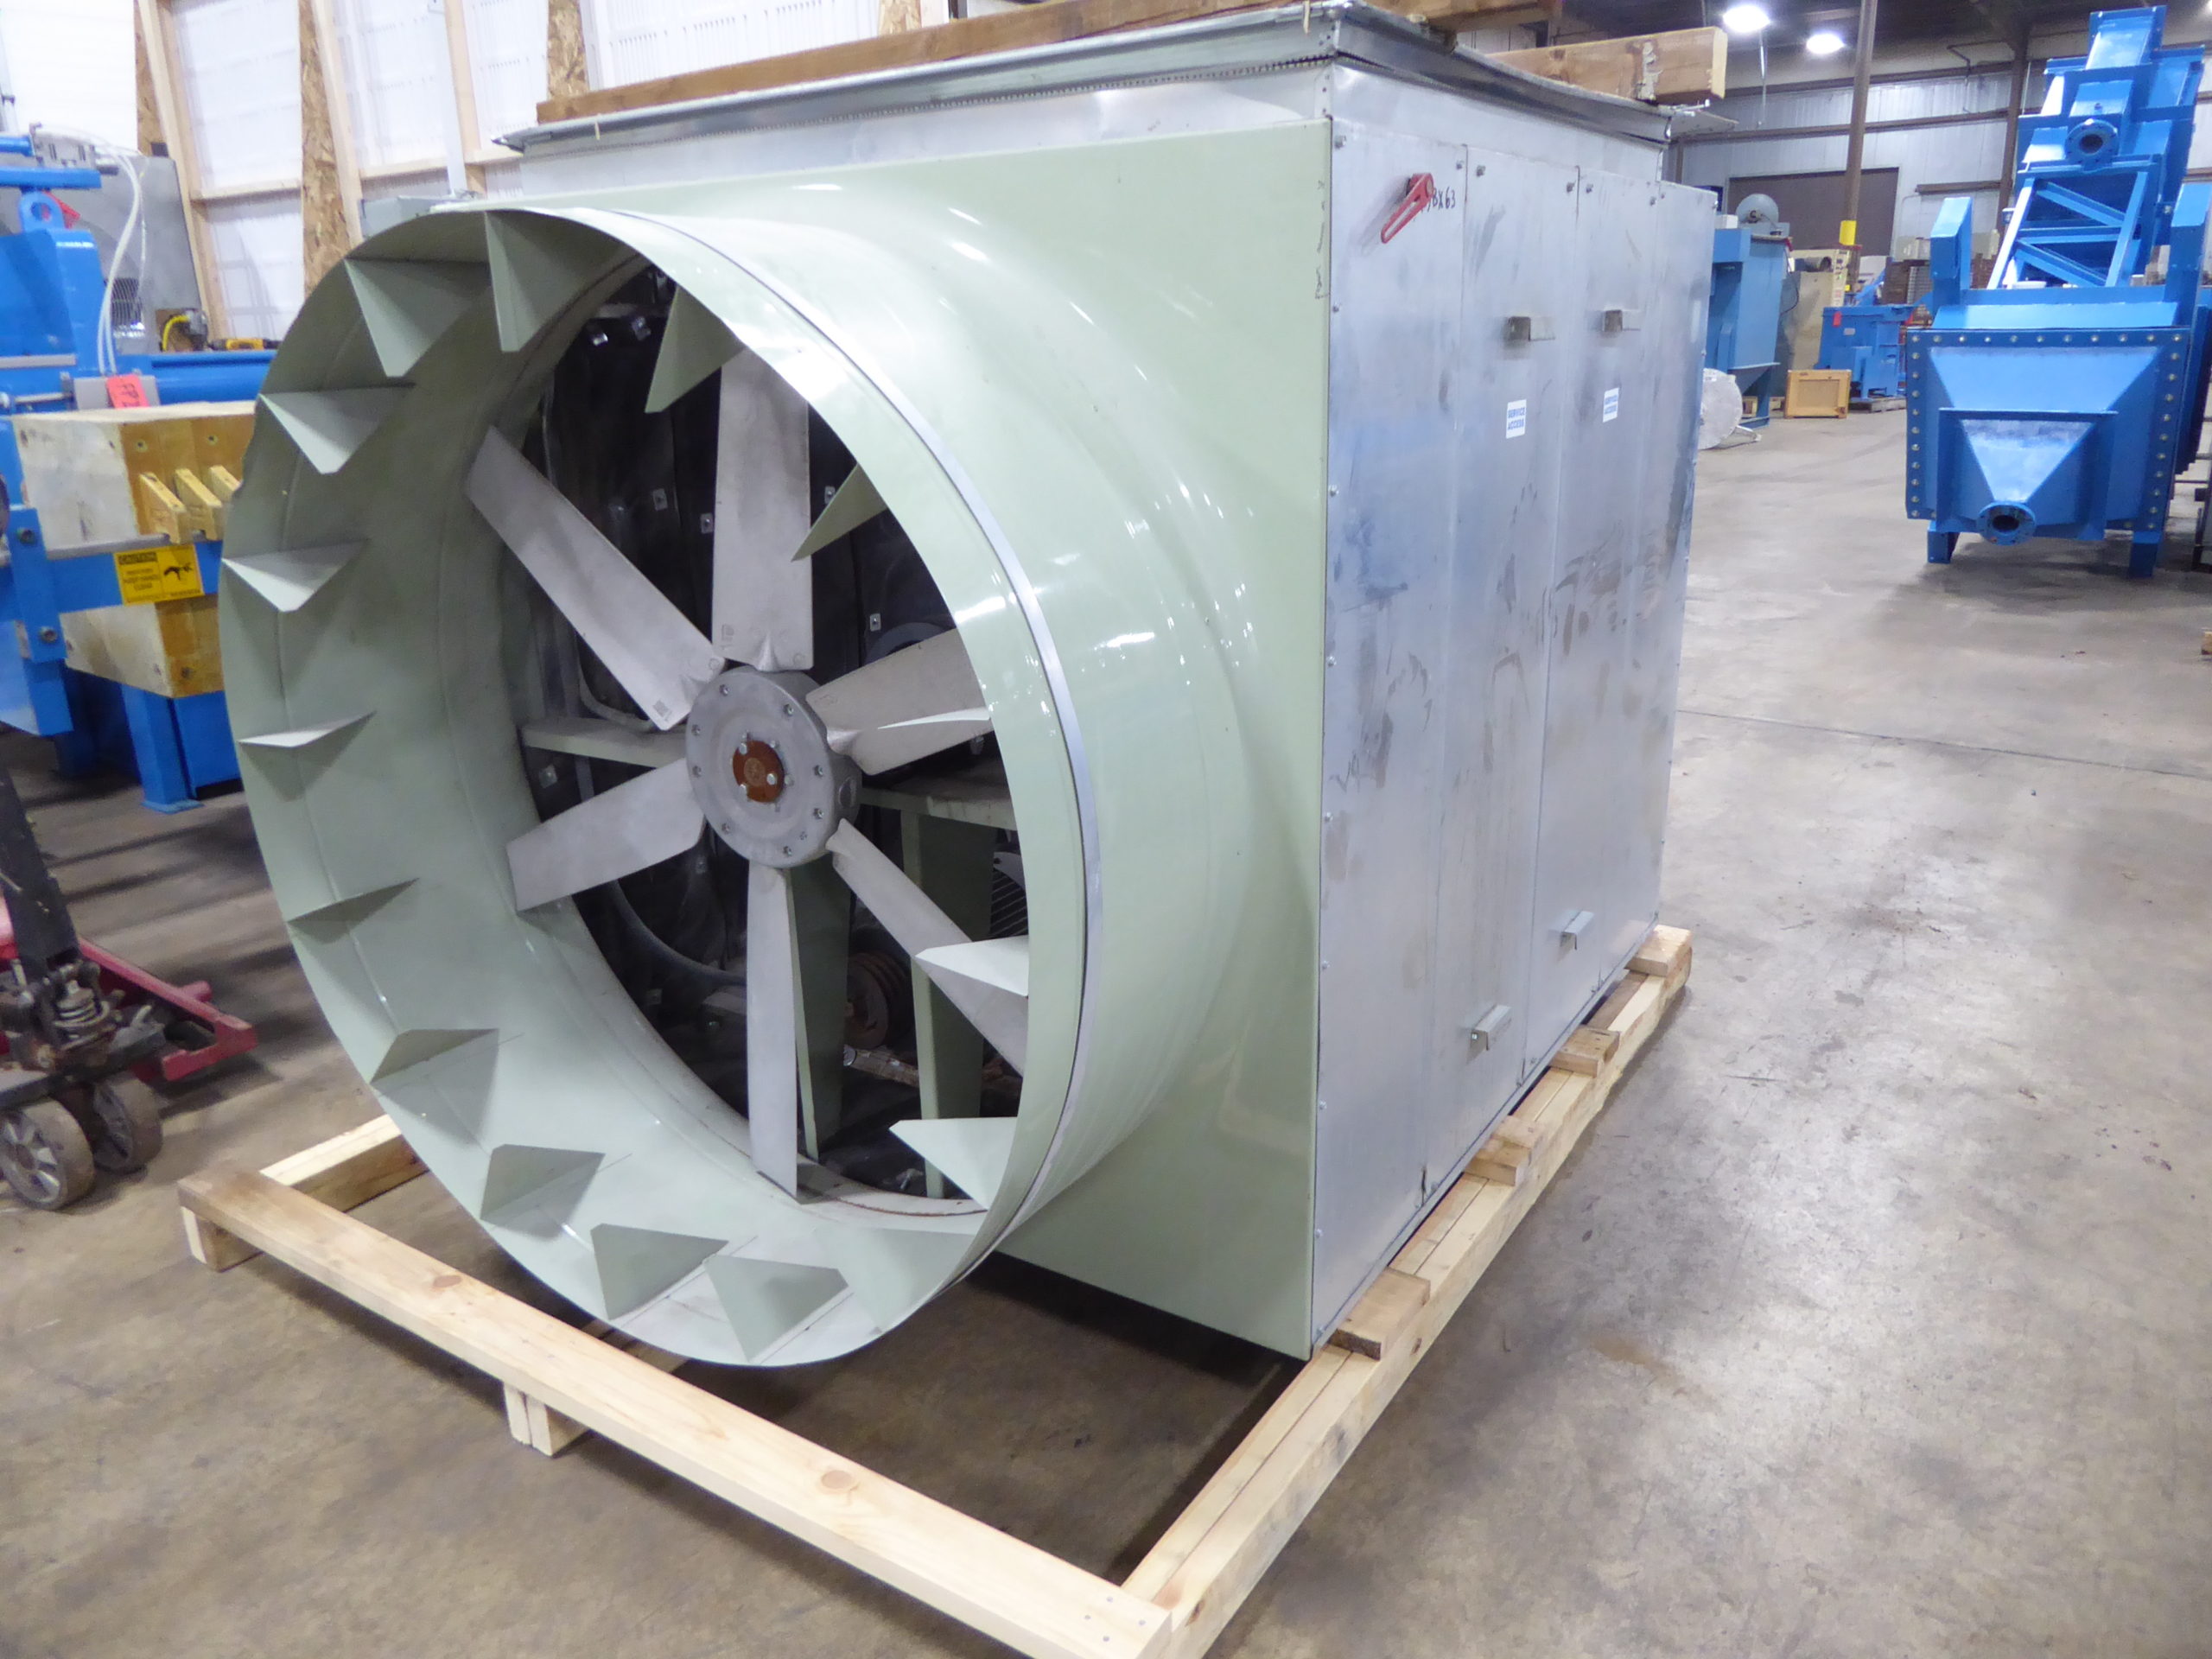 Used Exhaust Blower - Energy Jet 25000 CFM 7.5 HP Makeup Air Fan EB2277-Blowers - Exhaust